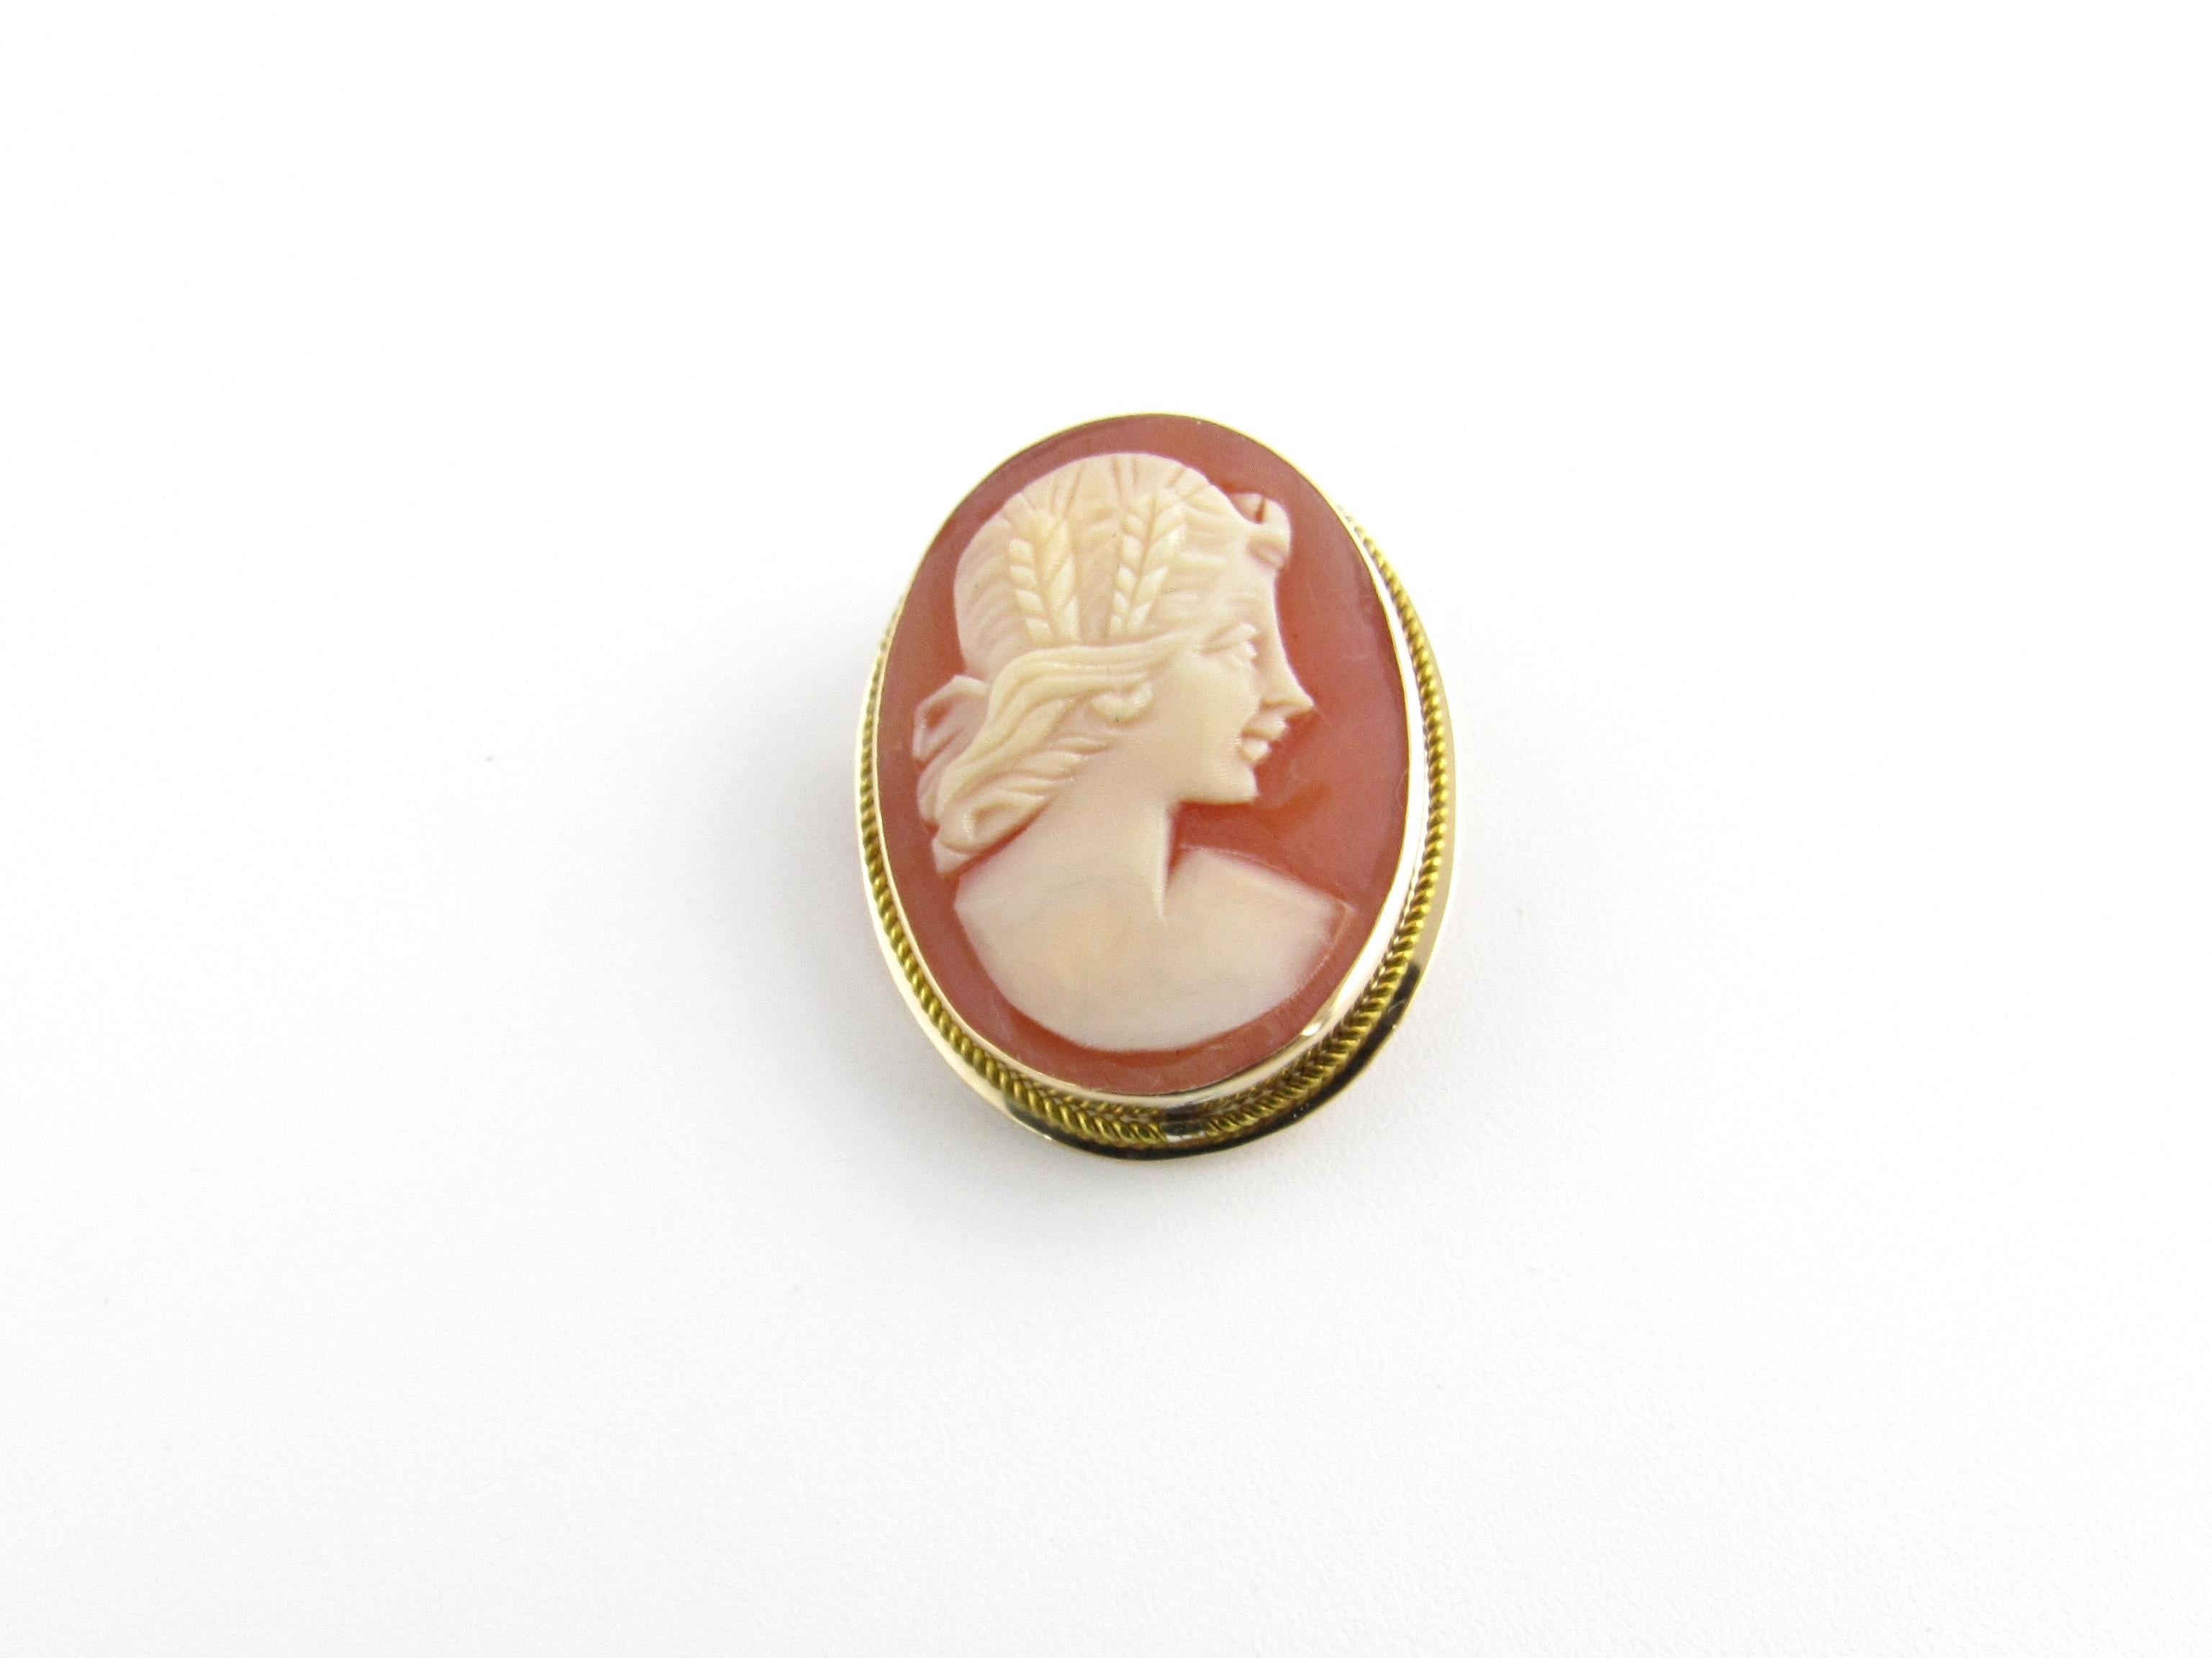 Vintage 14 Karat Yellow Gold Cameo Brooch / Pendant

This elegant cameo features a lovely lady in profile set in classic 14K yellow gold. Can be worn as a brooch or a pendant.

Size: 28 mm x 17 mm

Weight: 1.5 dwt. / 2.4 gr.

Acid tested for 14K